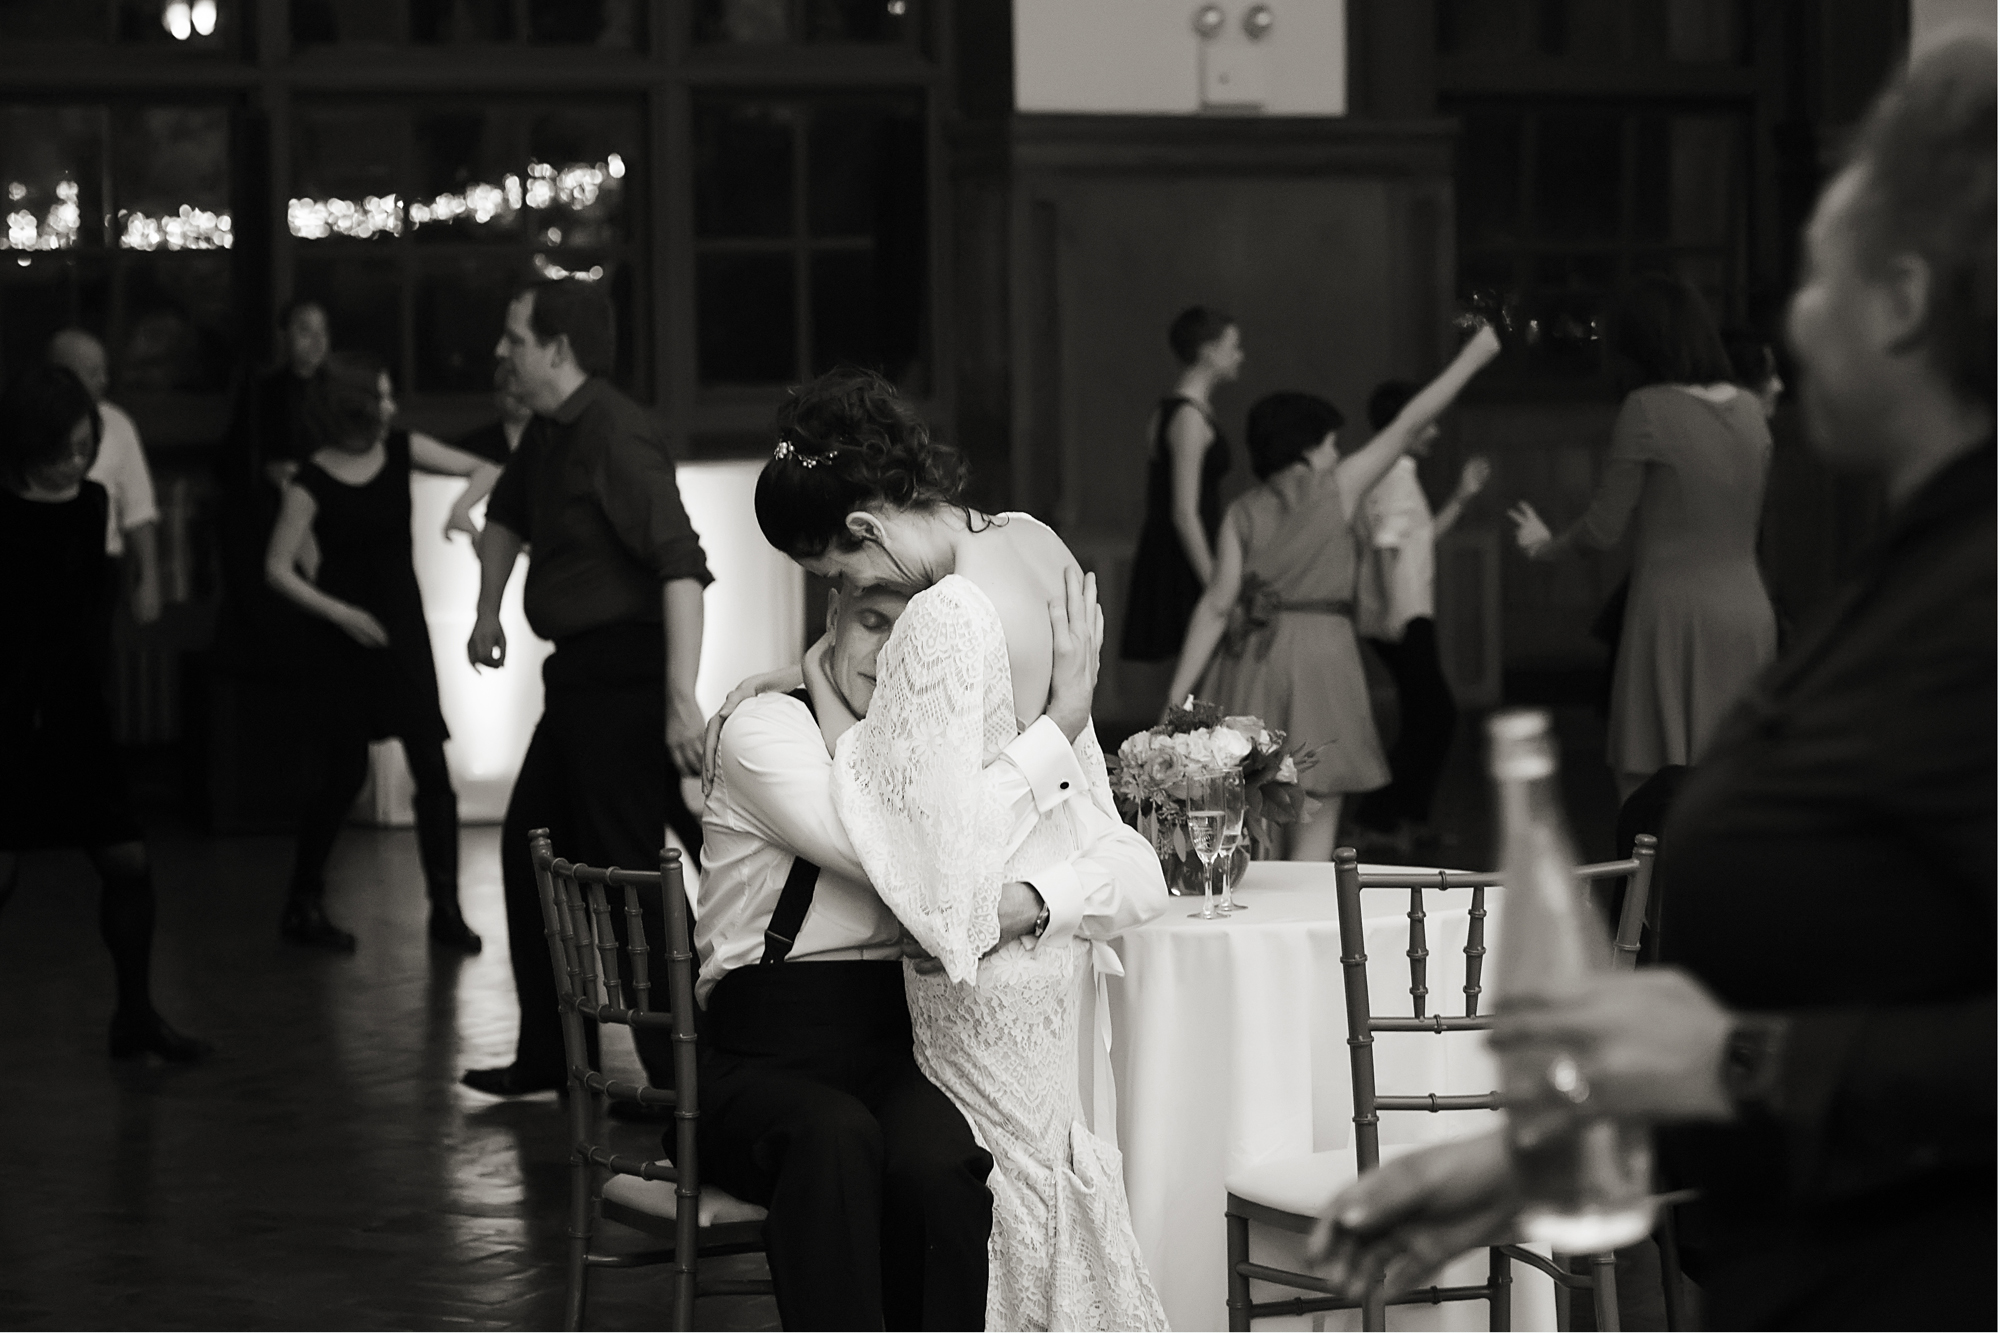 A wedding couple have quiet embrace during their wedding reception